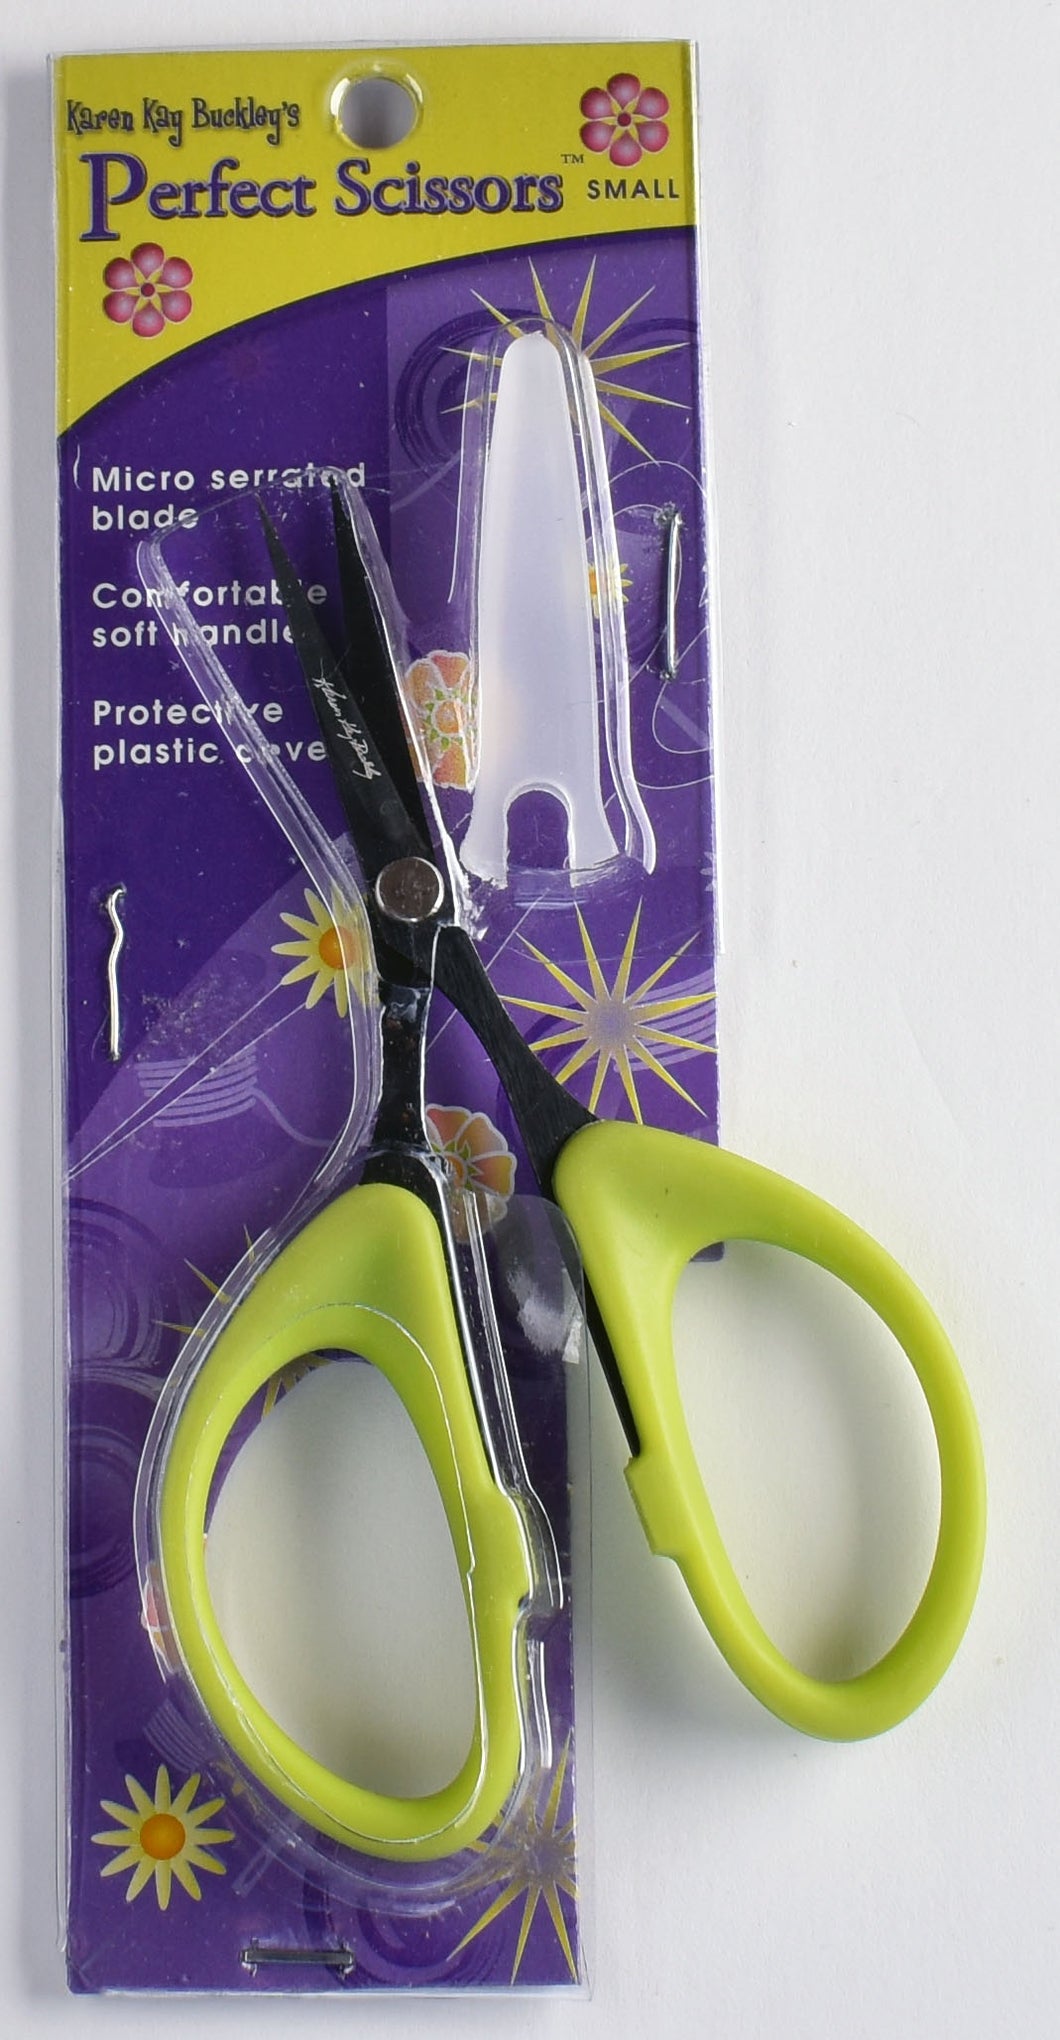 Karen Kay Buckley's Perfect Scissors Small West Wall A